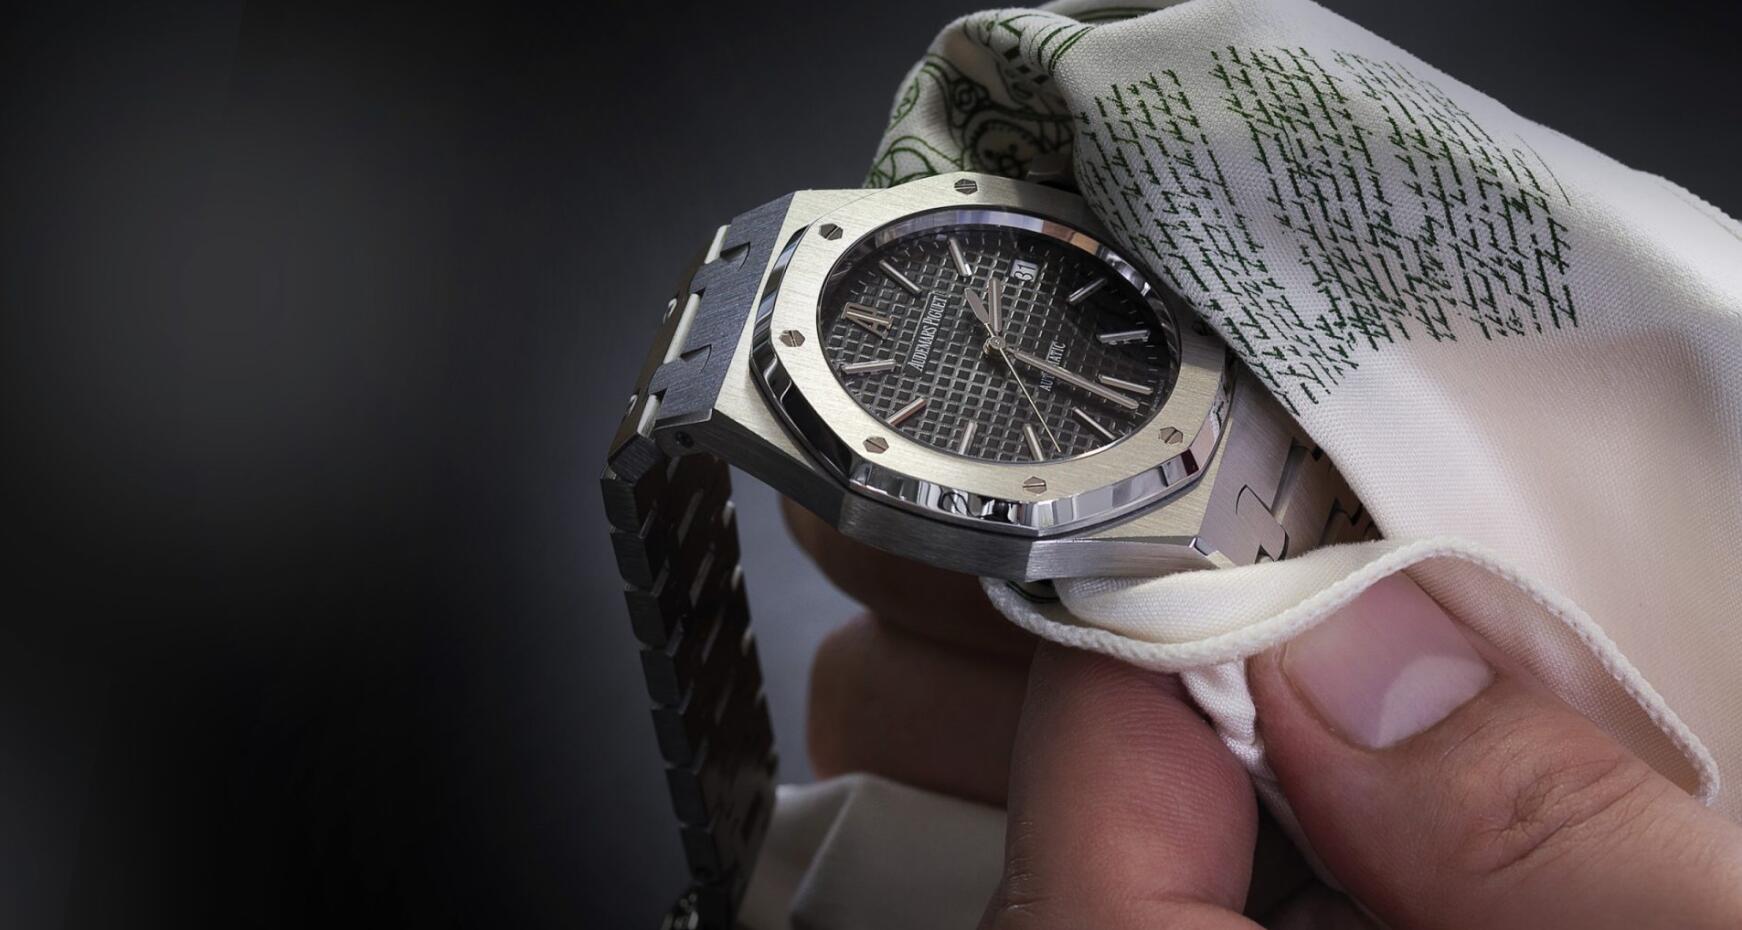 Replica Audemars Piguet and Richemont implement their program to combat the theft of luxury watches